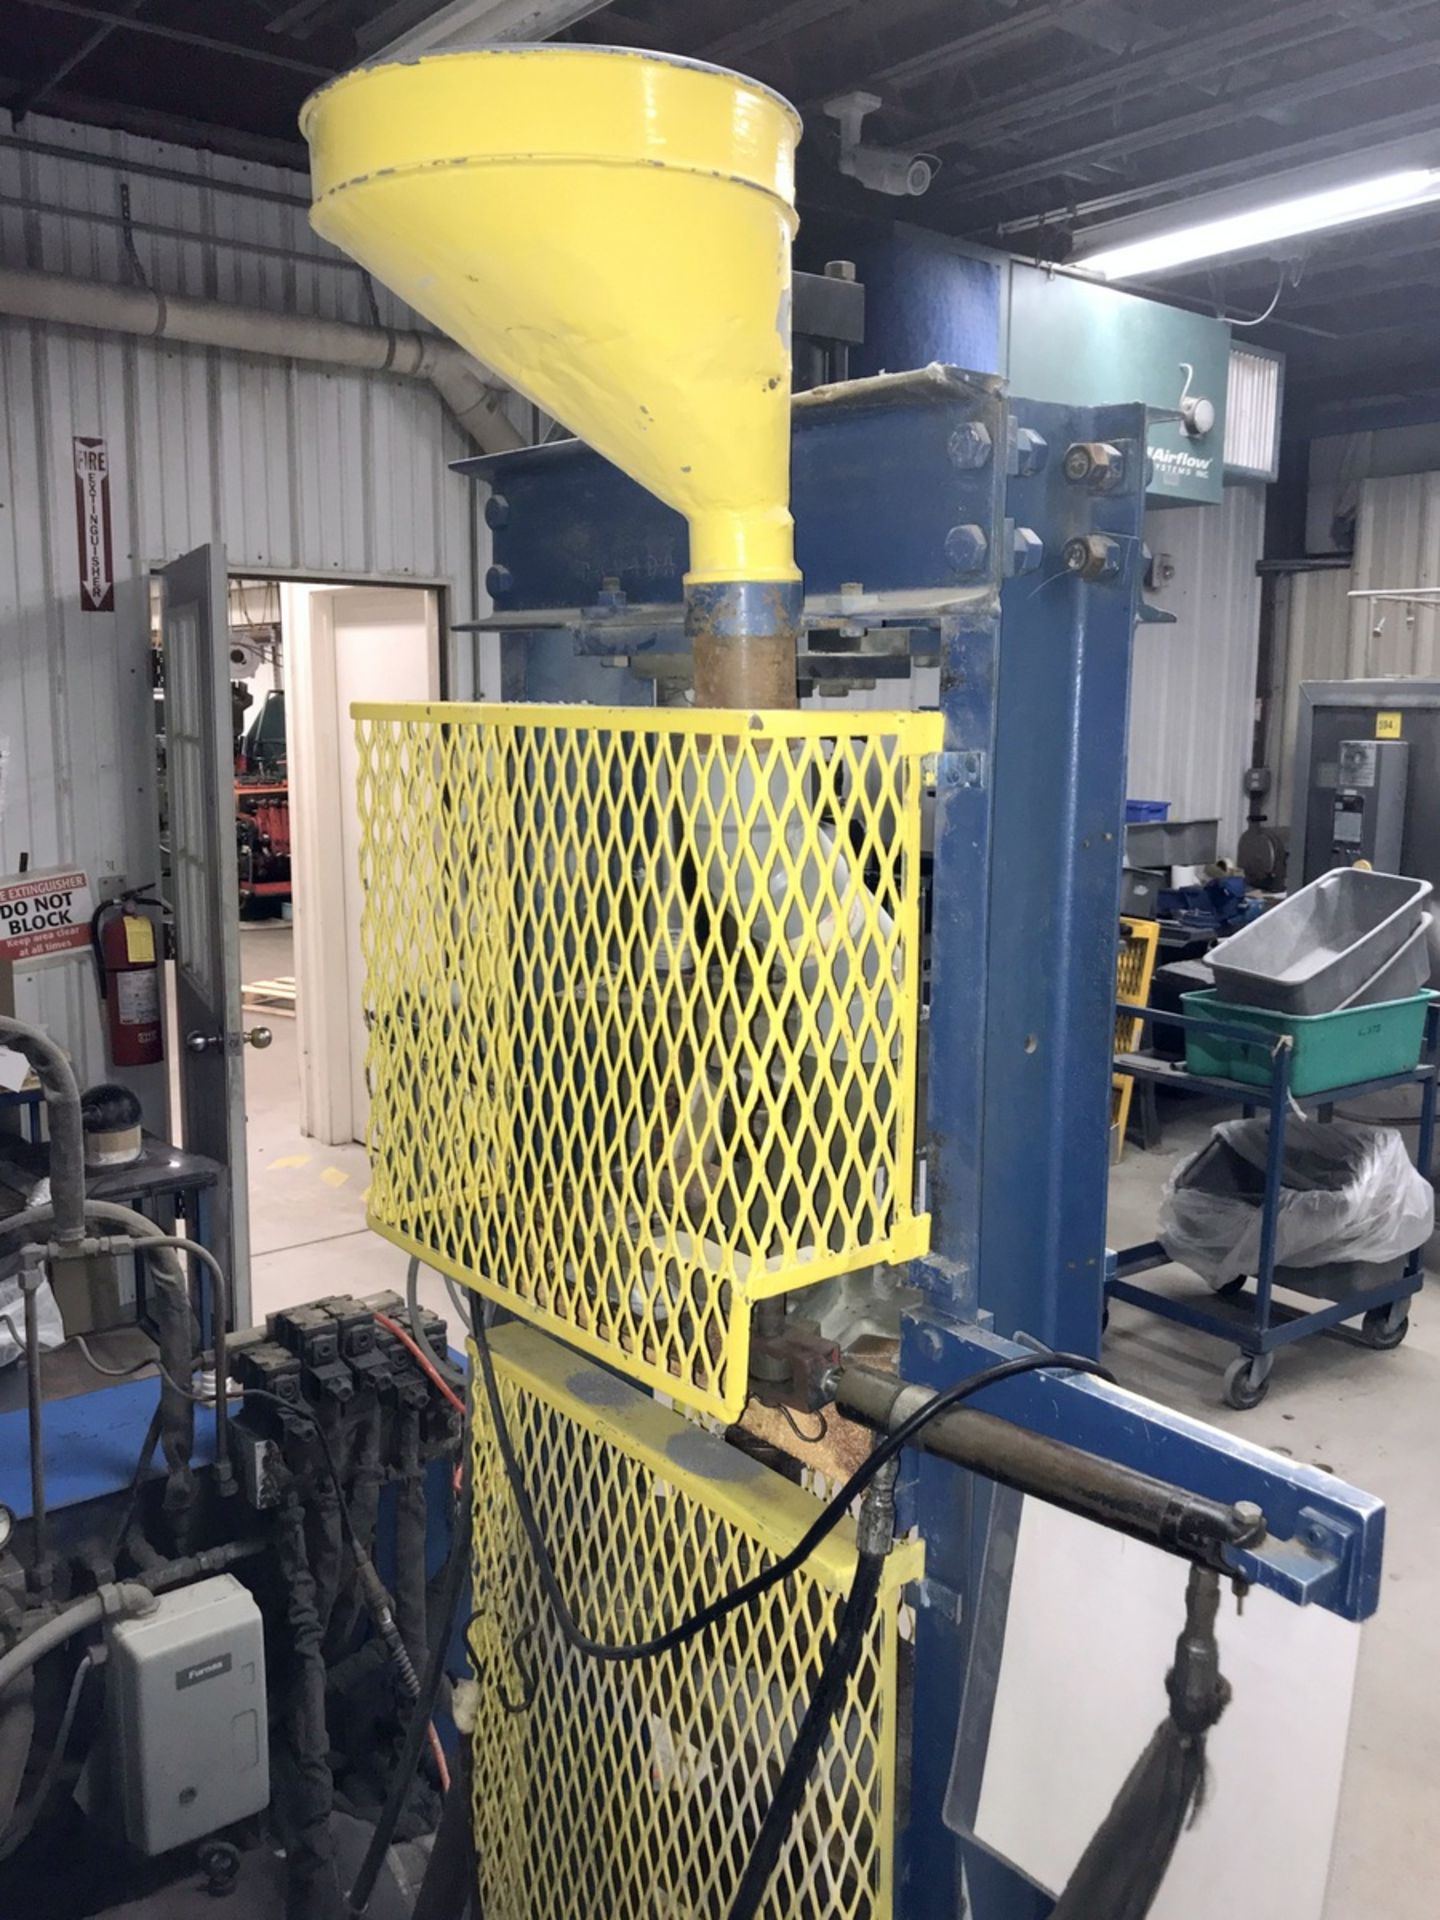 H-Frame Hydraulic Shop Press Retrofitted for Porcelain - Image 4 of 8